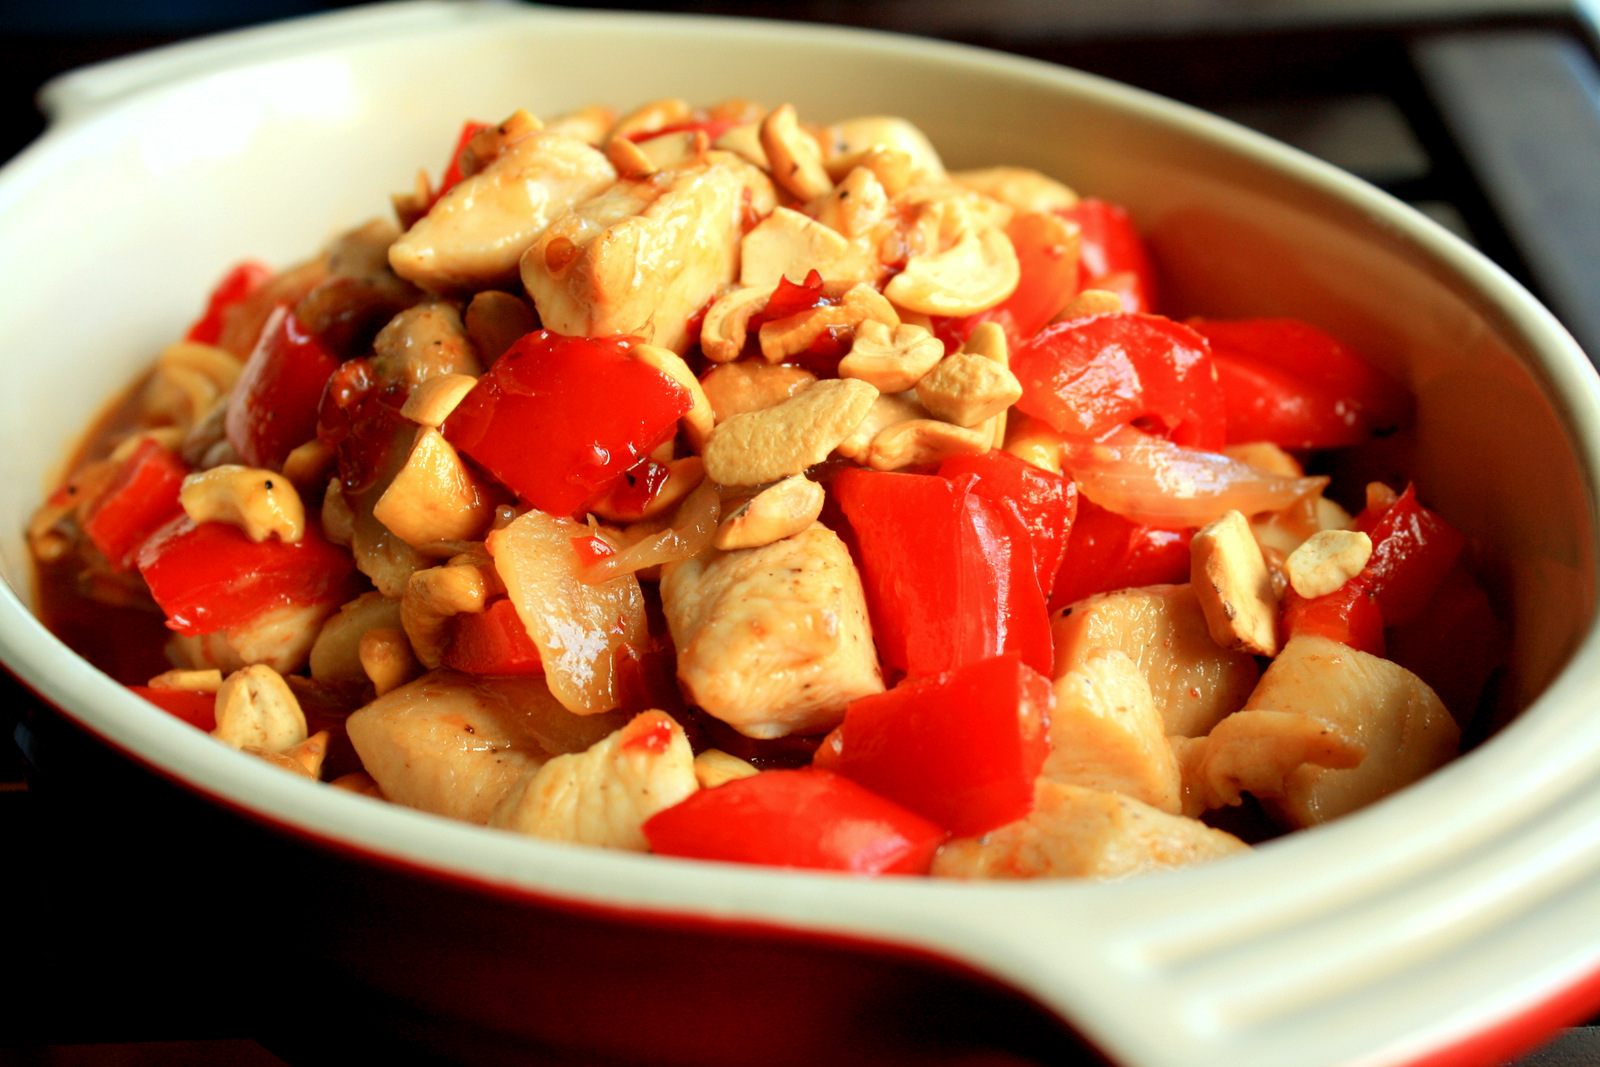 Chicken, Cashew Nuts and Red Peppers in Sweet Chili Sauce